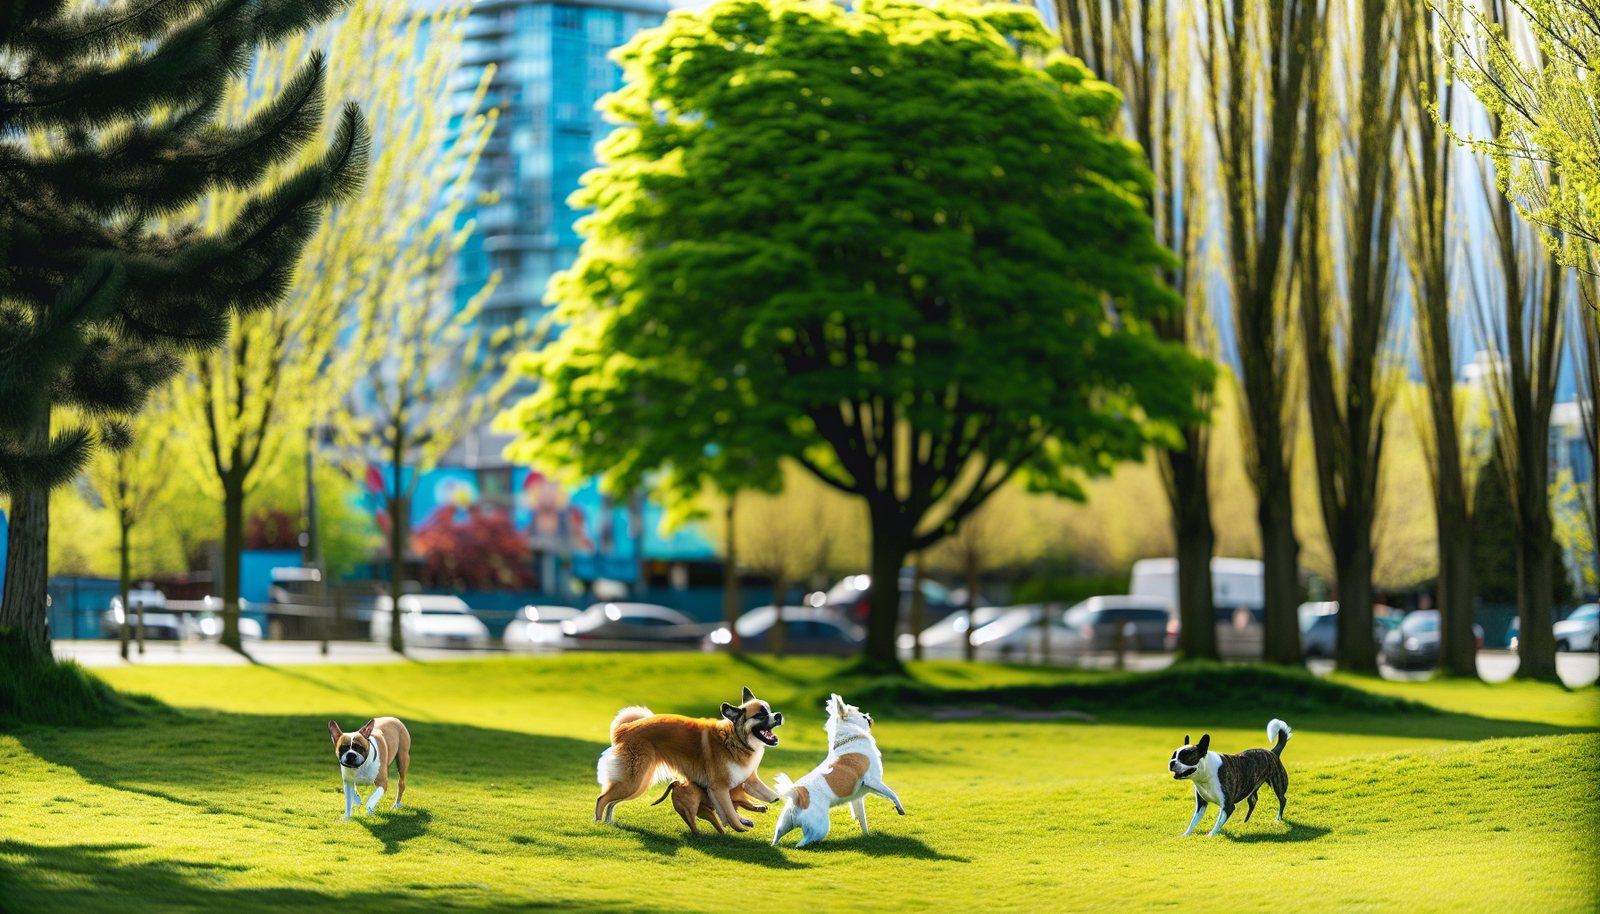 Dogs playing joyfully in an off-leash park in Vancouver